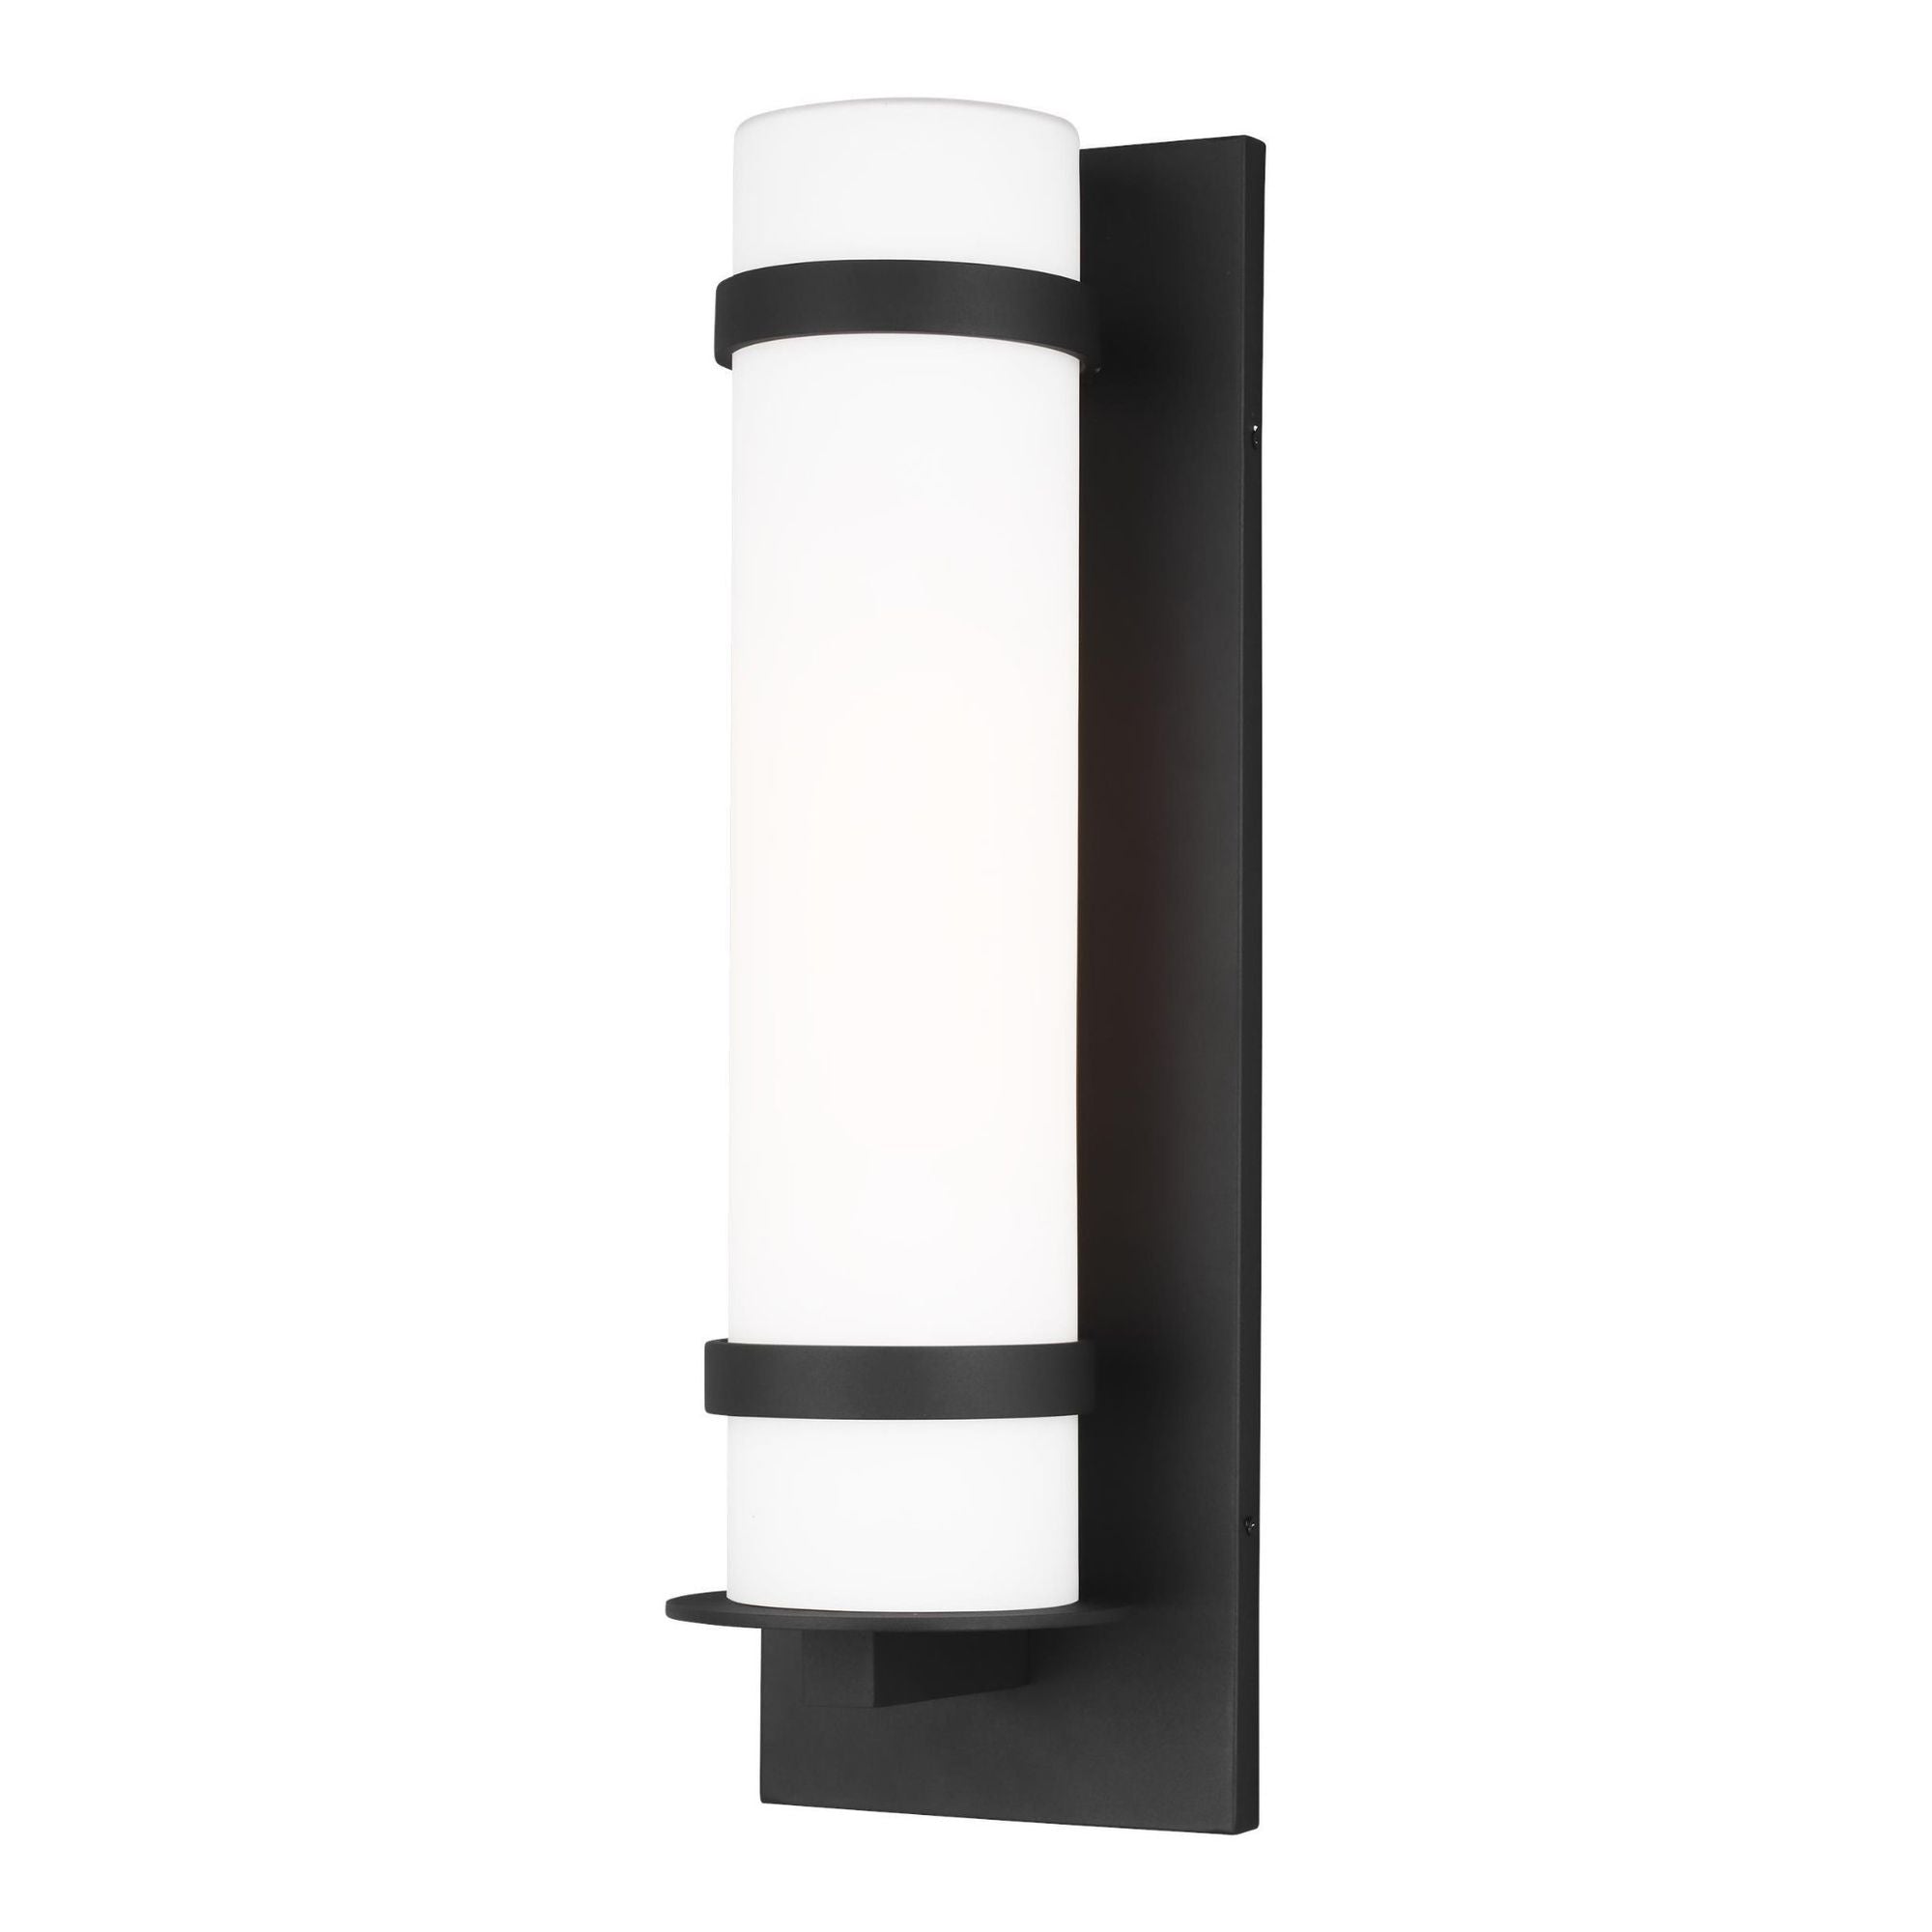 Alban Large One Light Outdoor Wall Lantern LED Modern Fixture 8" Width 24.625" Height Aluminum Round Etched Opal Shade in Black